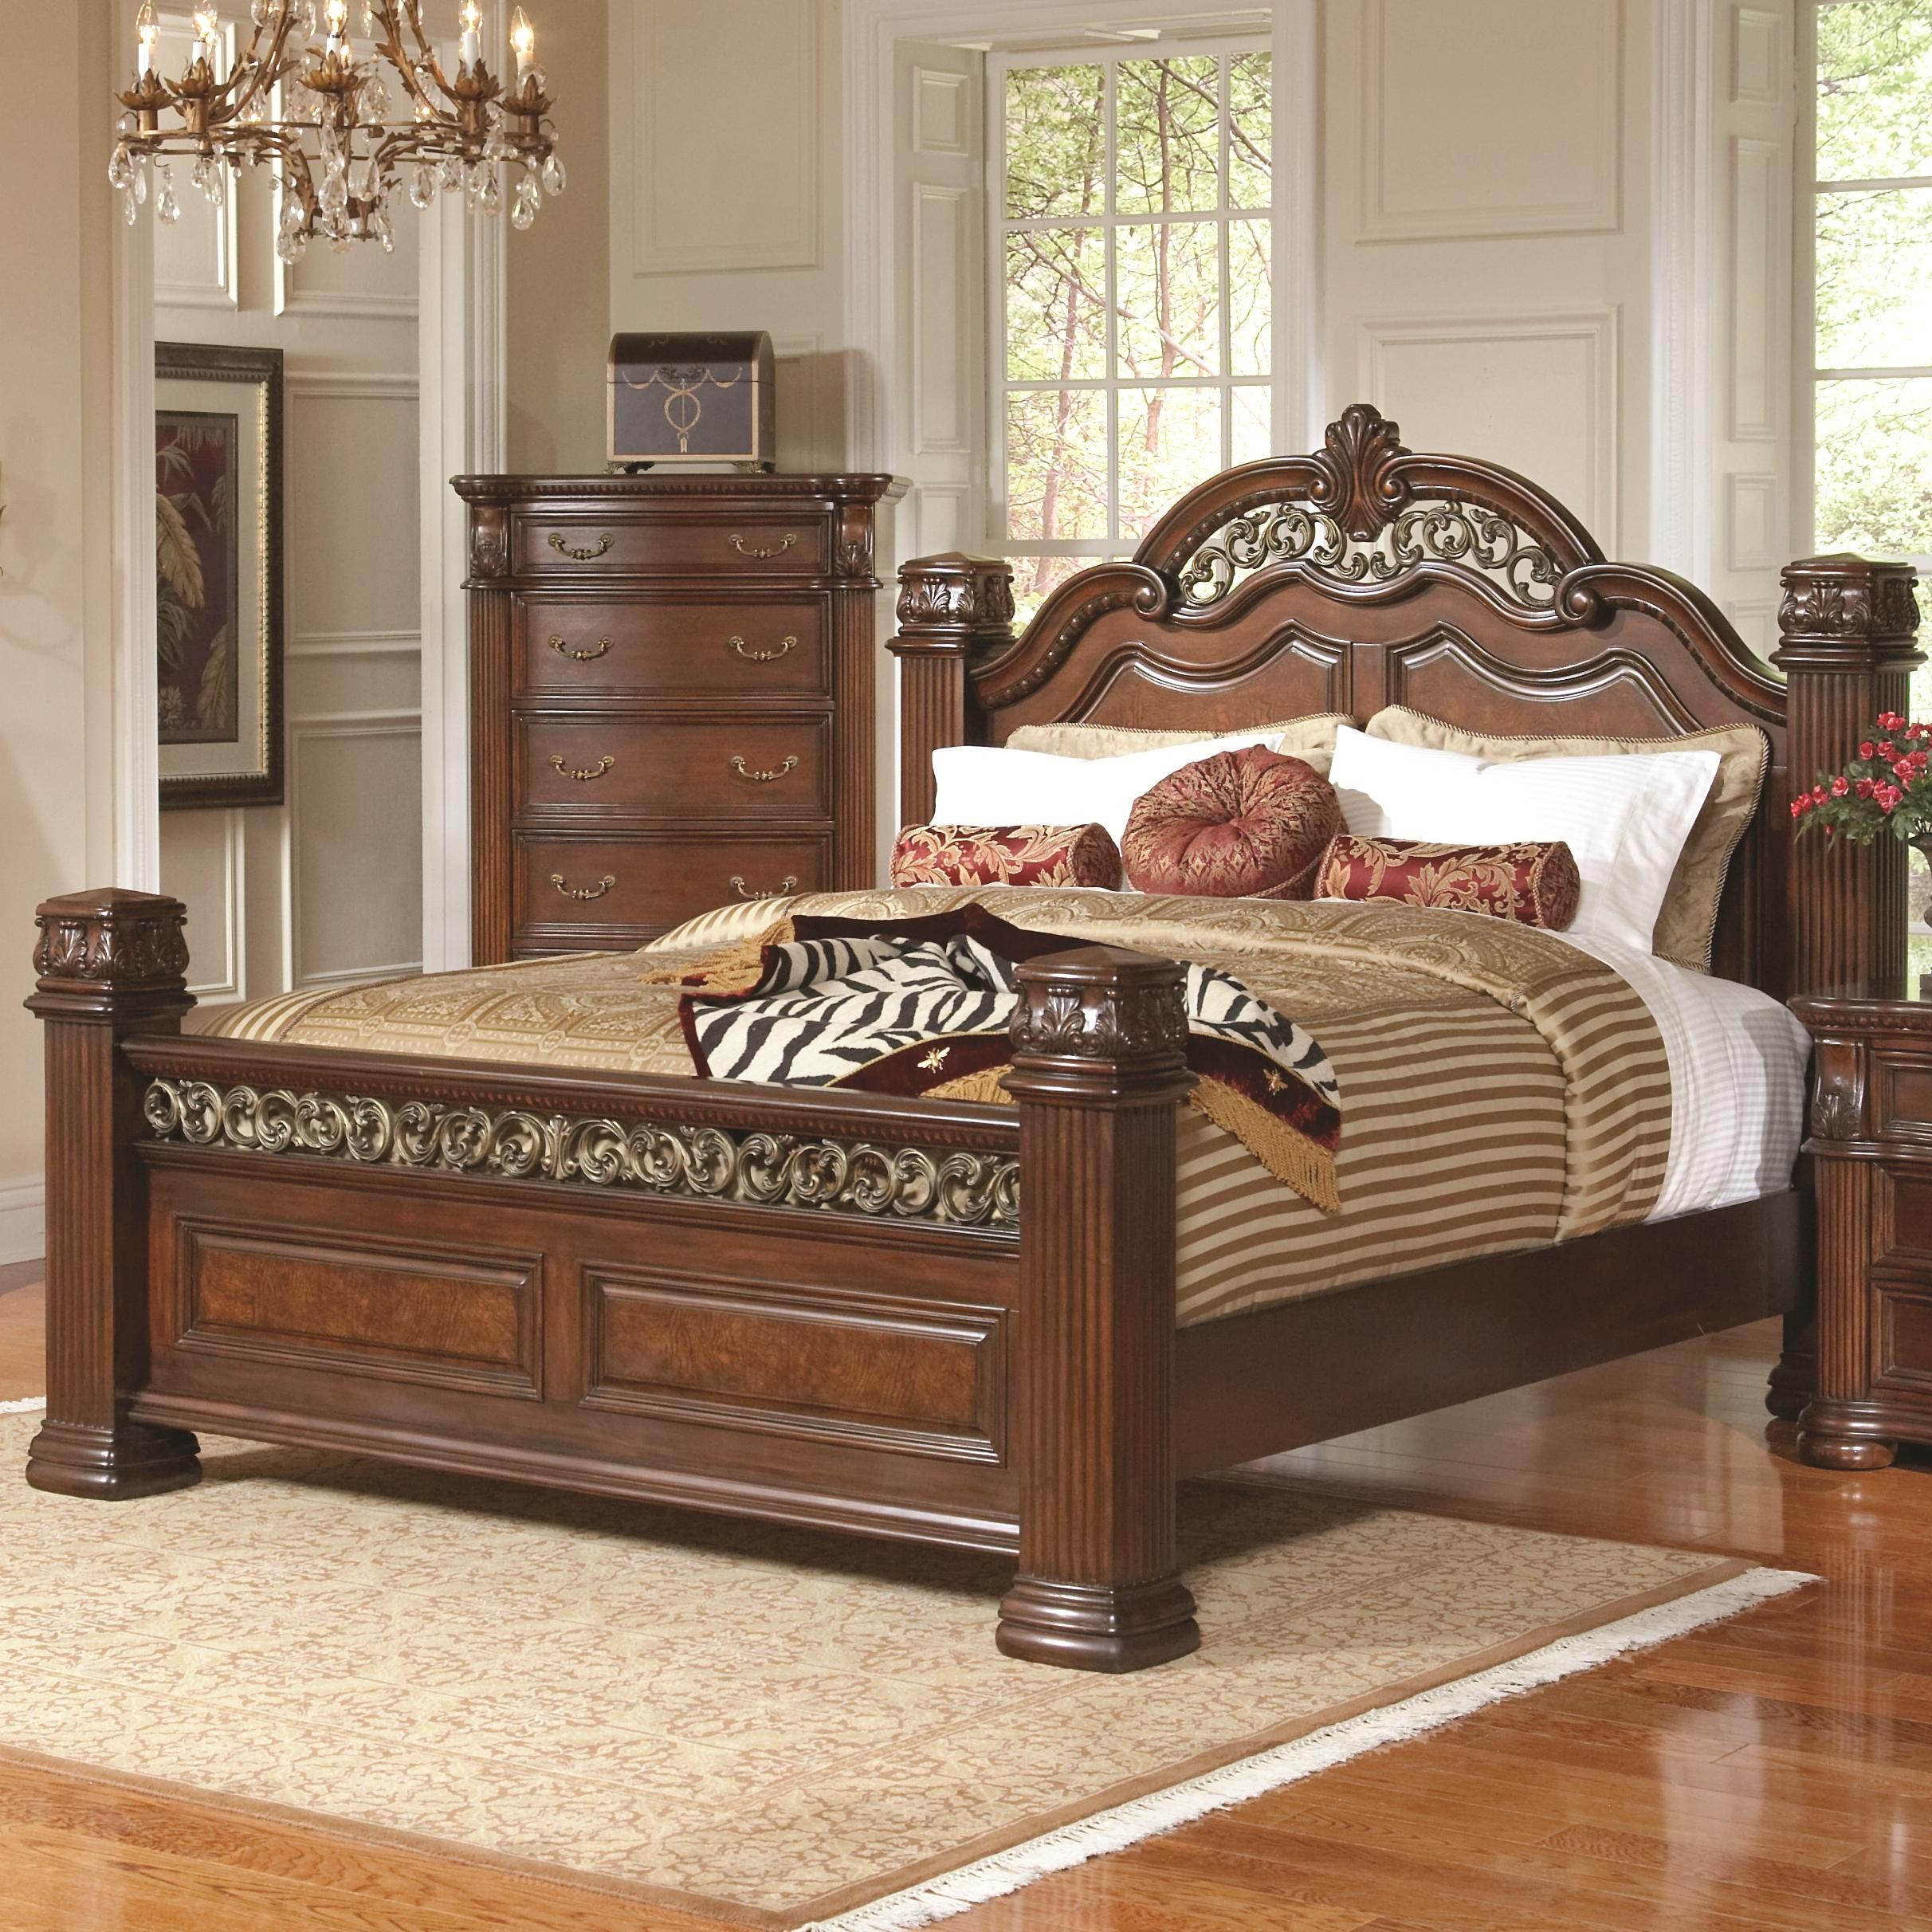 Comparing leather beds with wooden beds by homearena